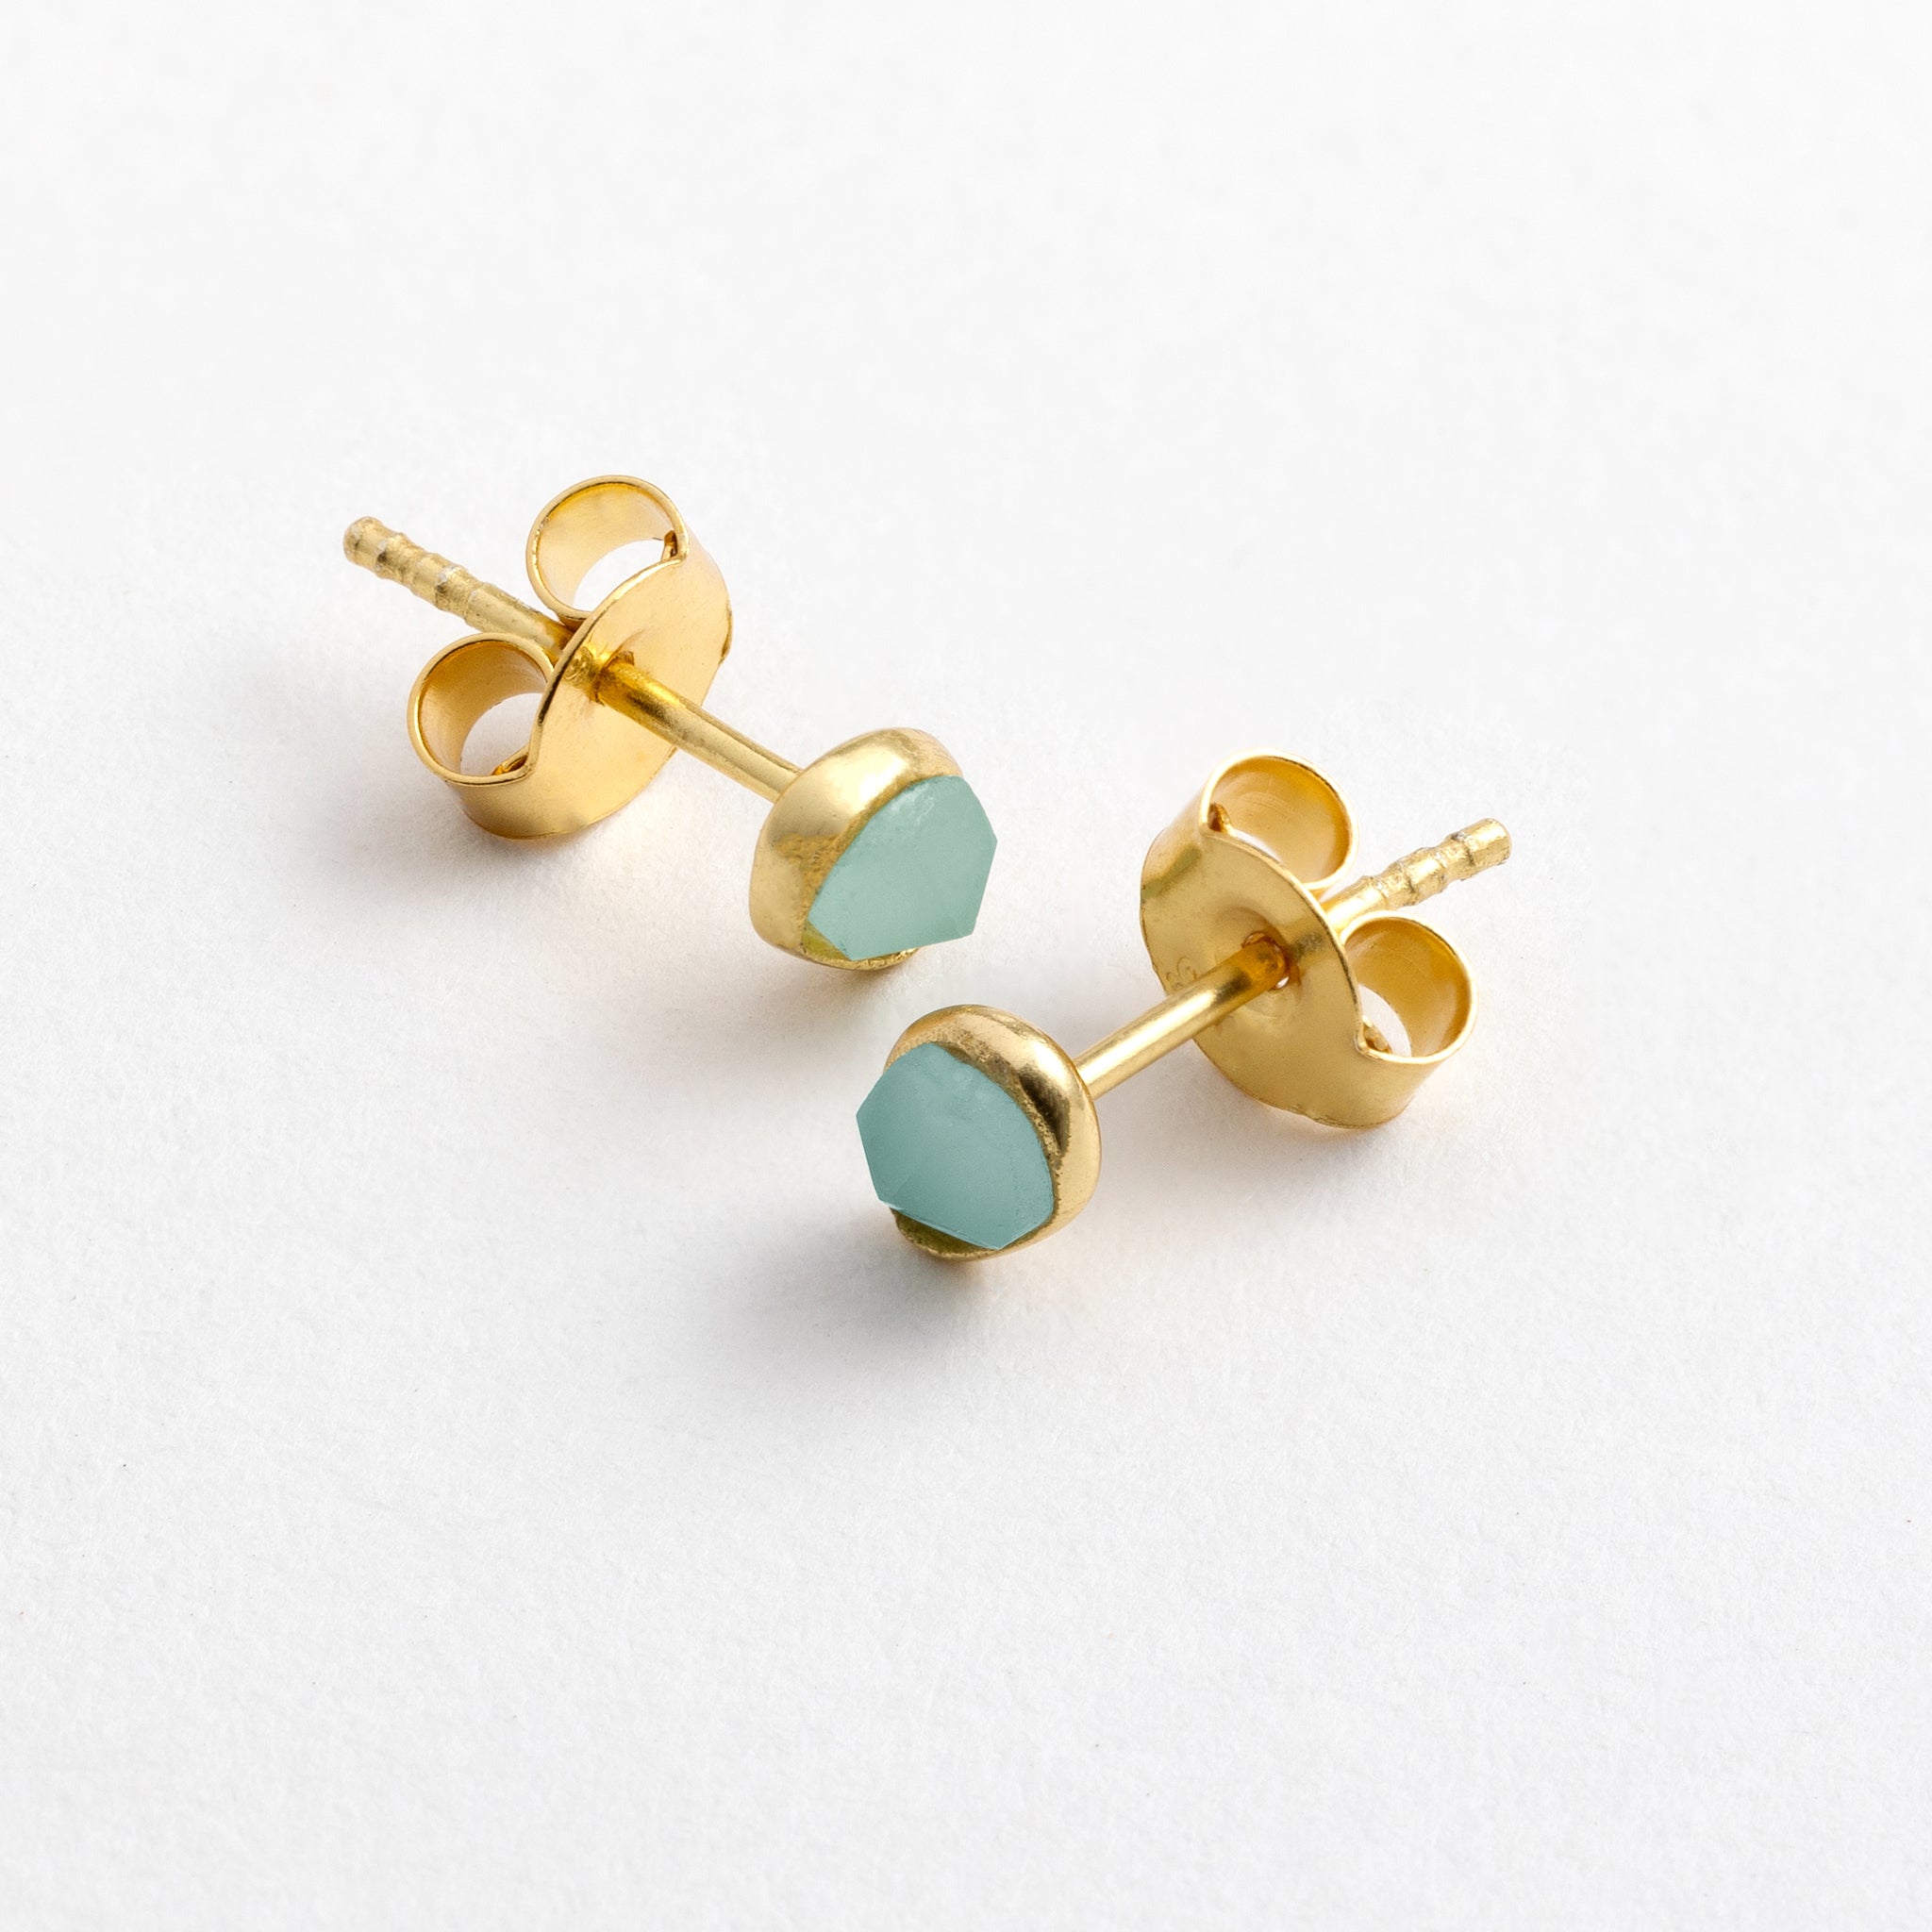 Stud features a sparkling, handcut natural gemstone and is crafted from sterling silver or 18ct gold vermeil.